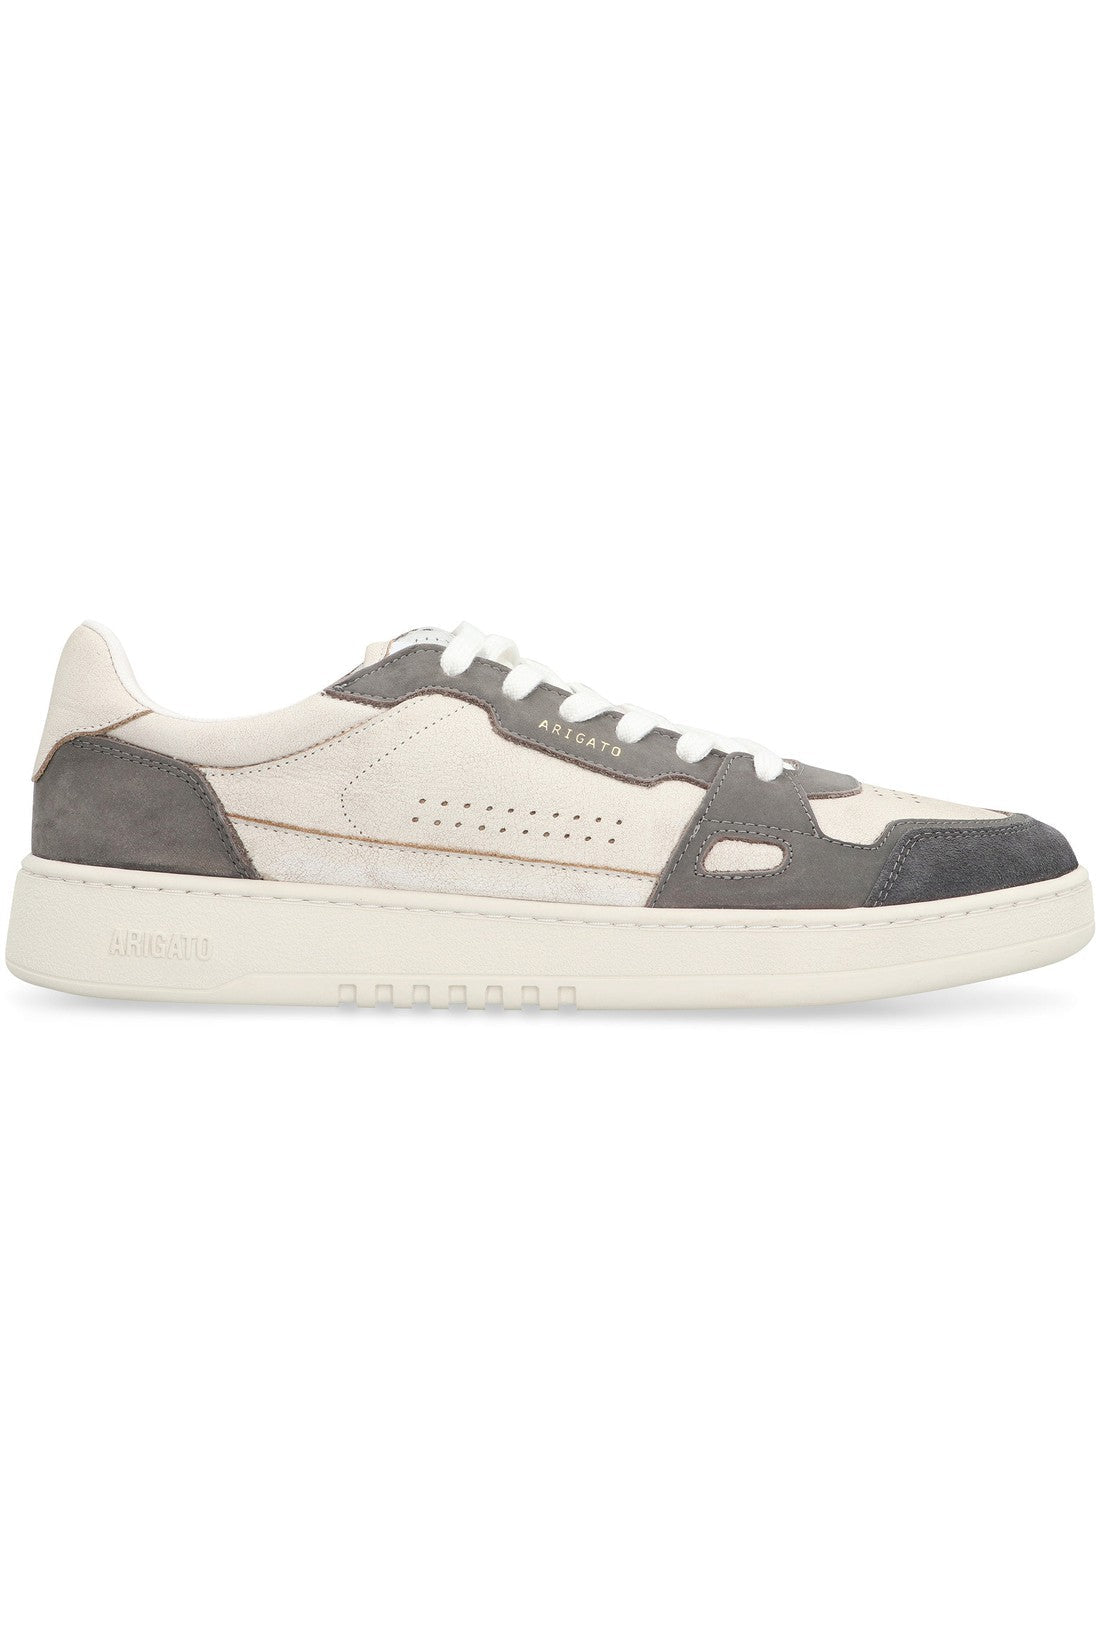 Axel Arigato-OUTLET-SALE-Dice Lo leather low-top sneakers-ARCHIVIST